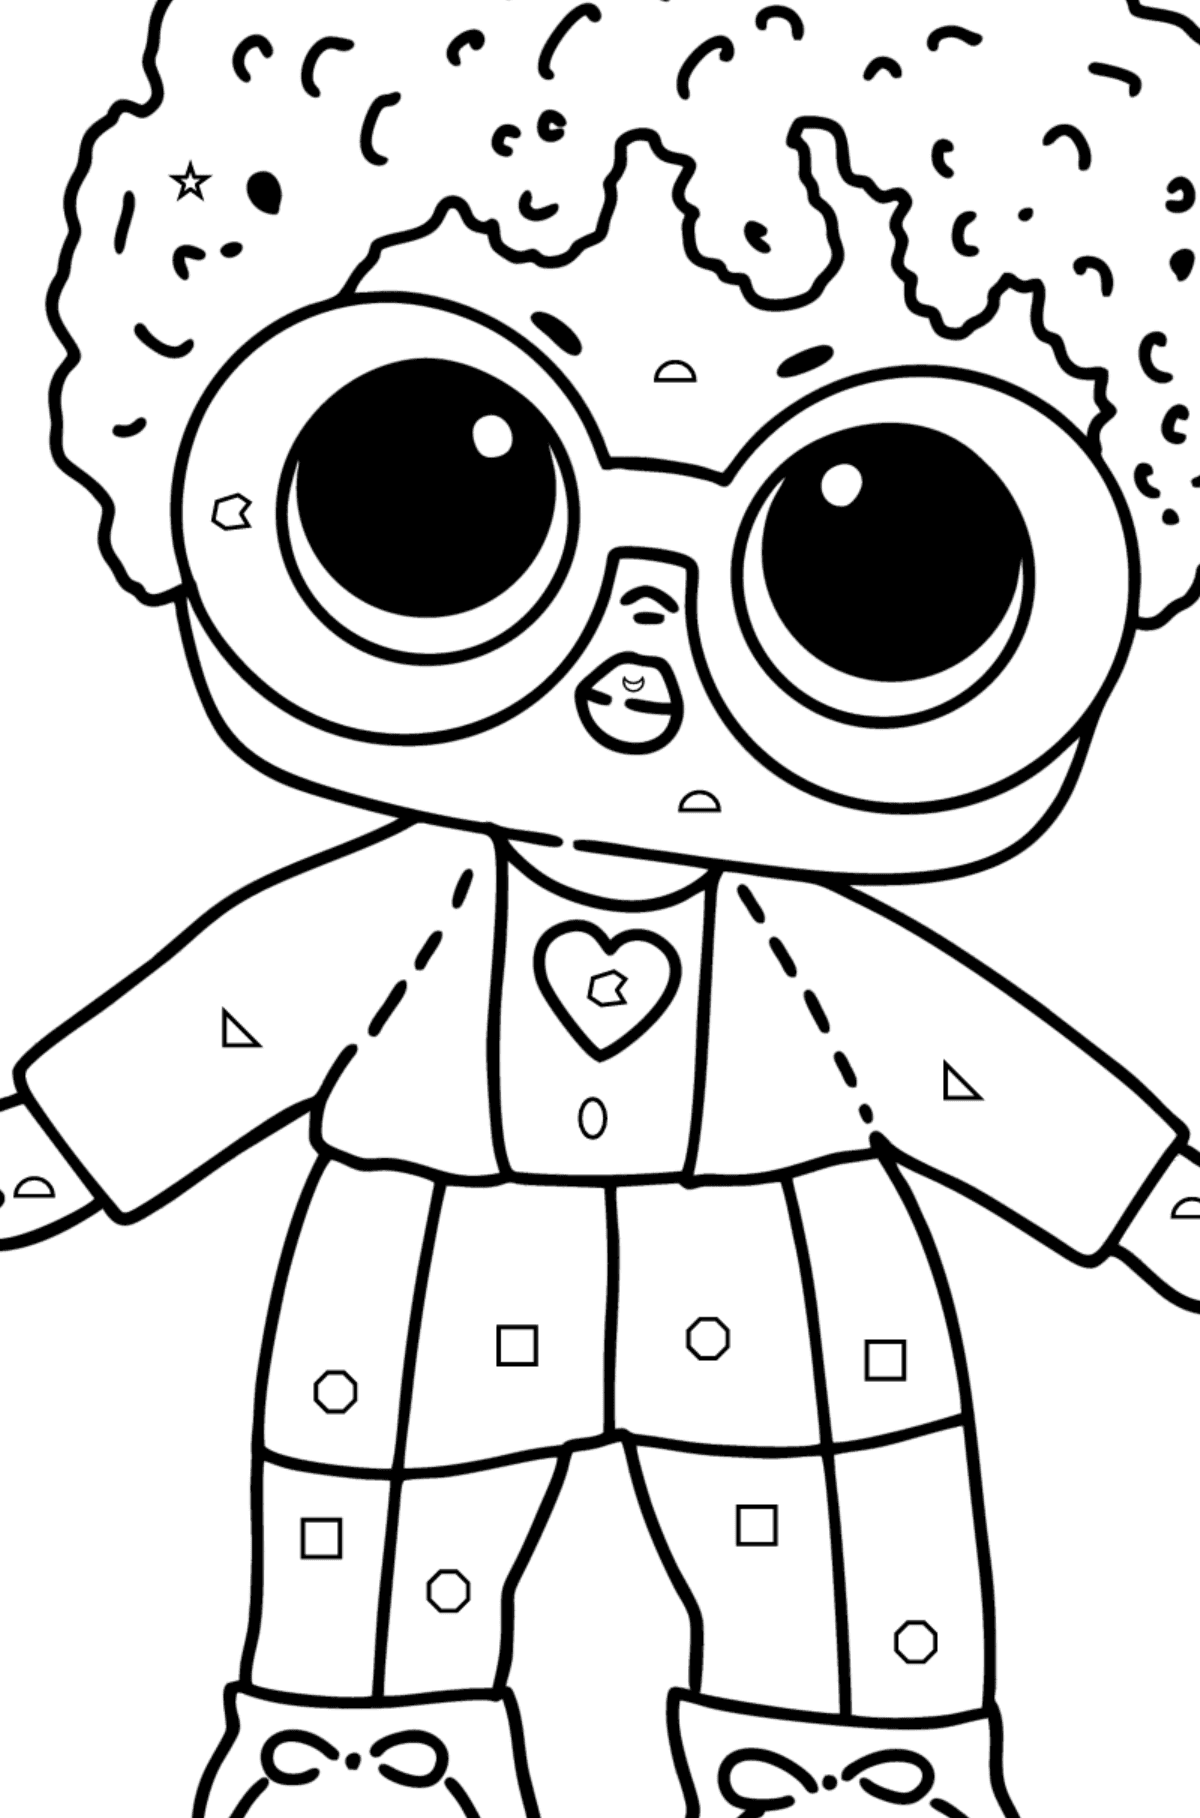 LOL Surprise Steezy Doll Boy coloring page - Coloring by Geometric Shapes for Kids